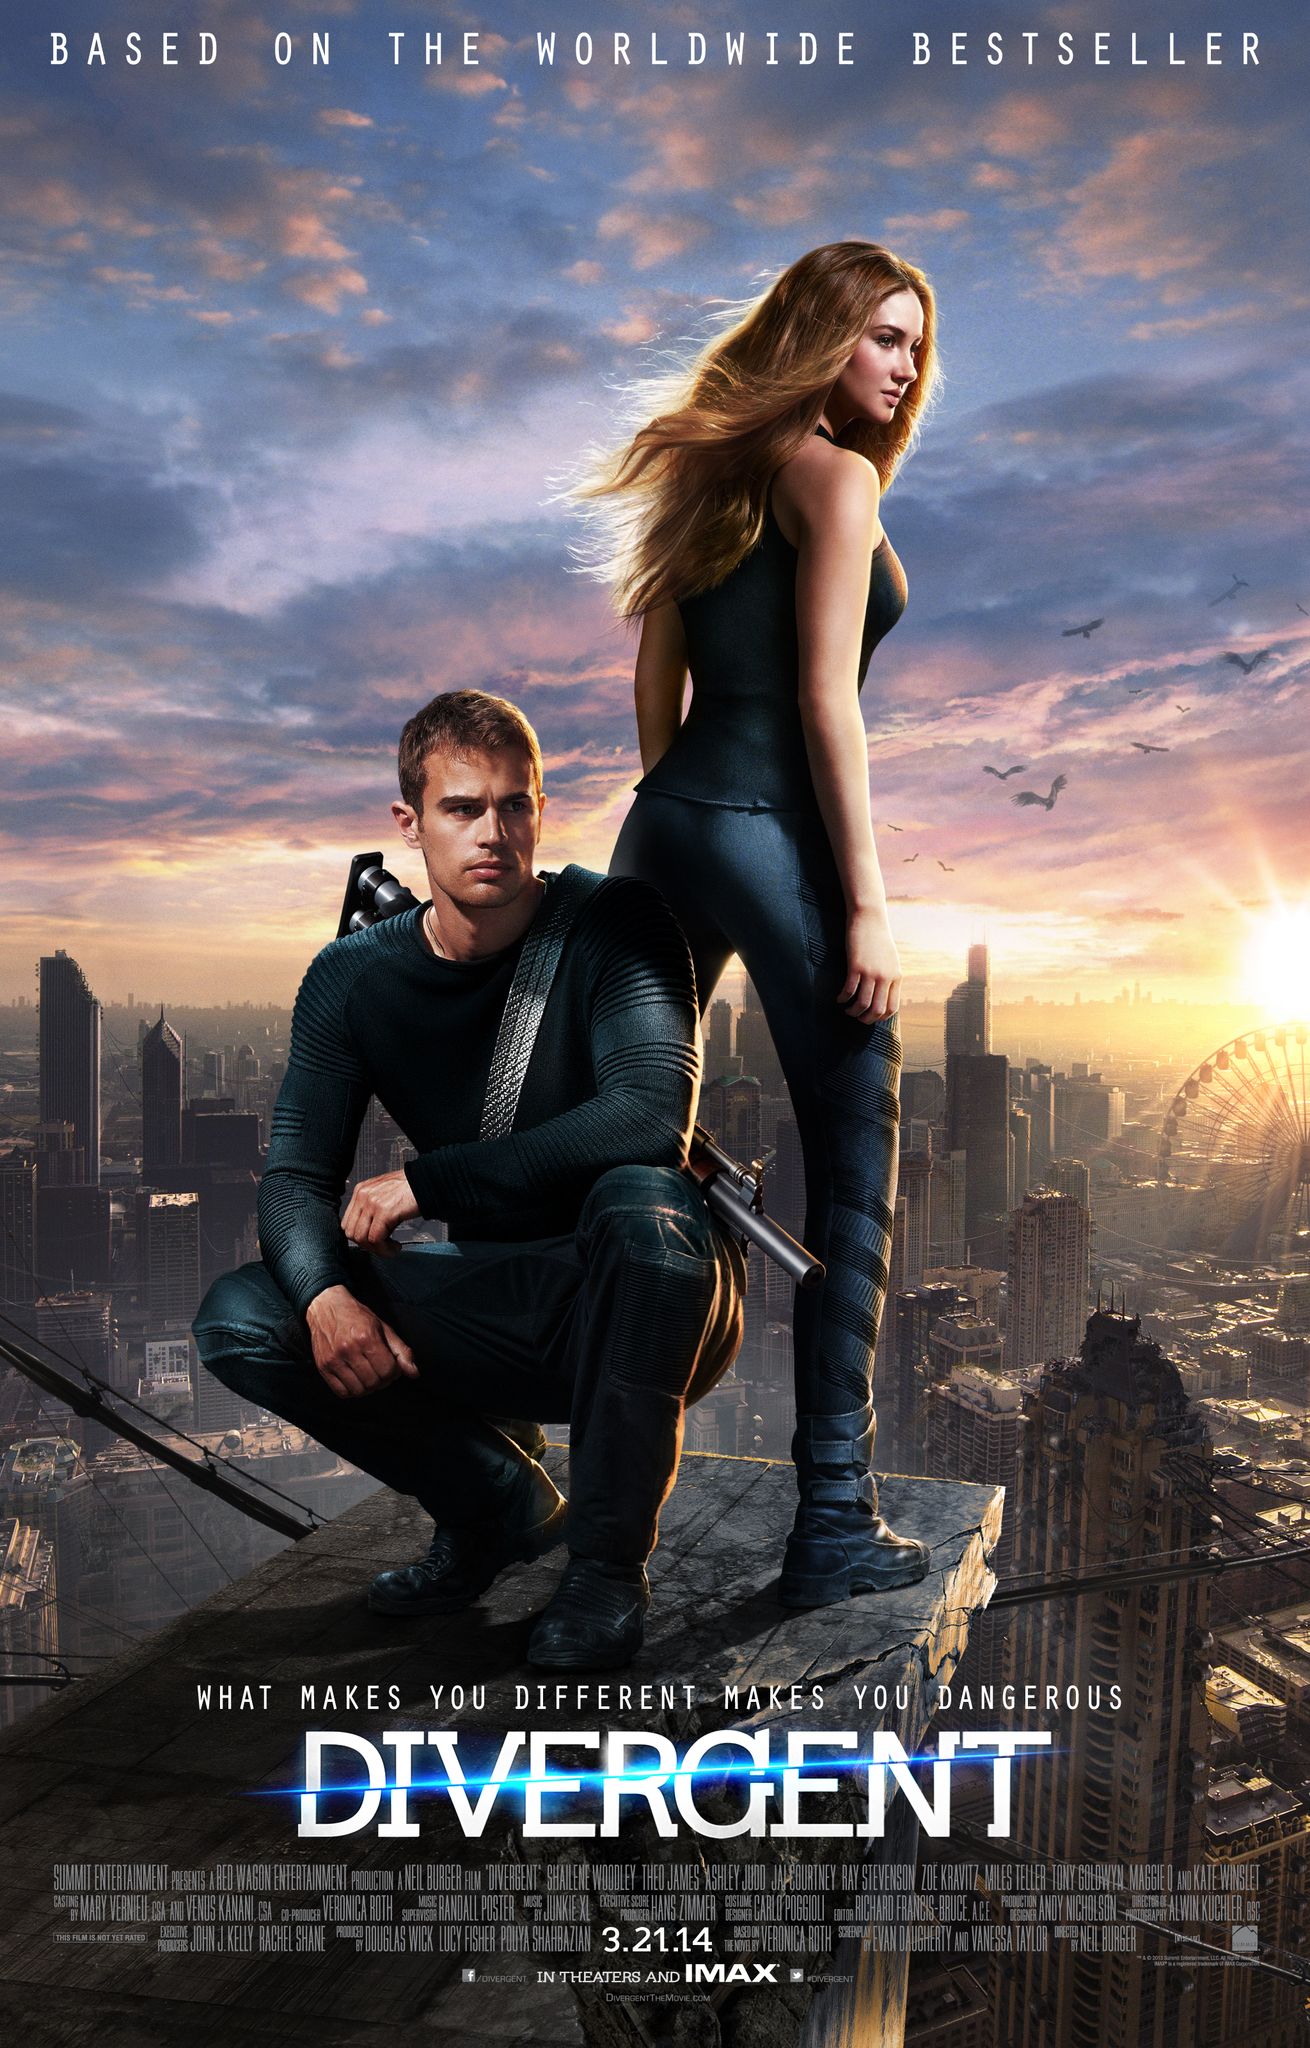 poster for Divergent starring Shailene Woodley and Theo James